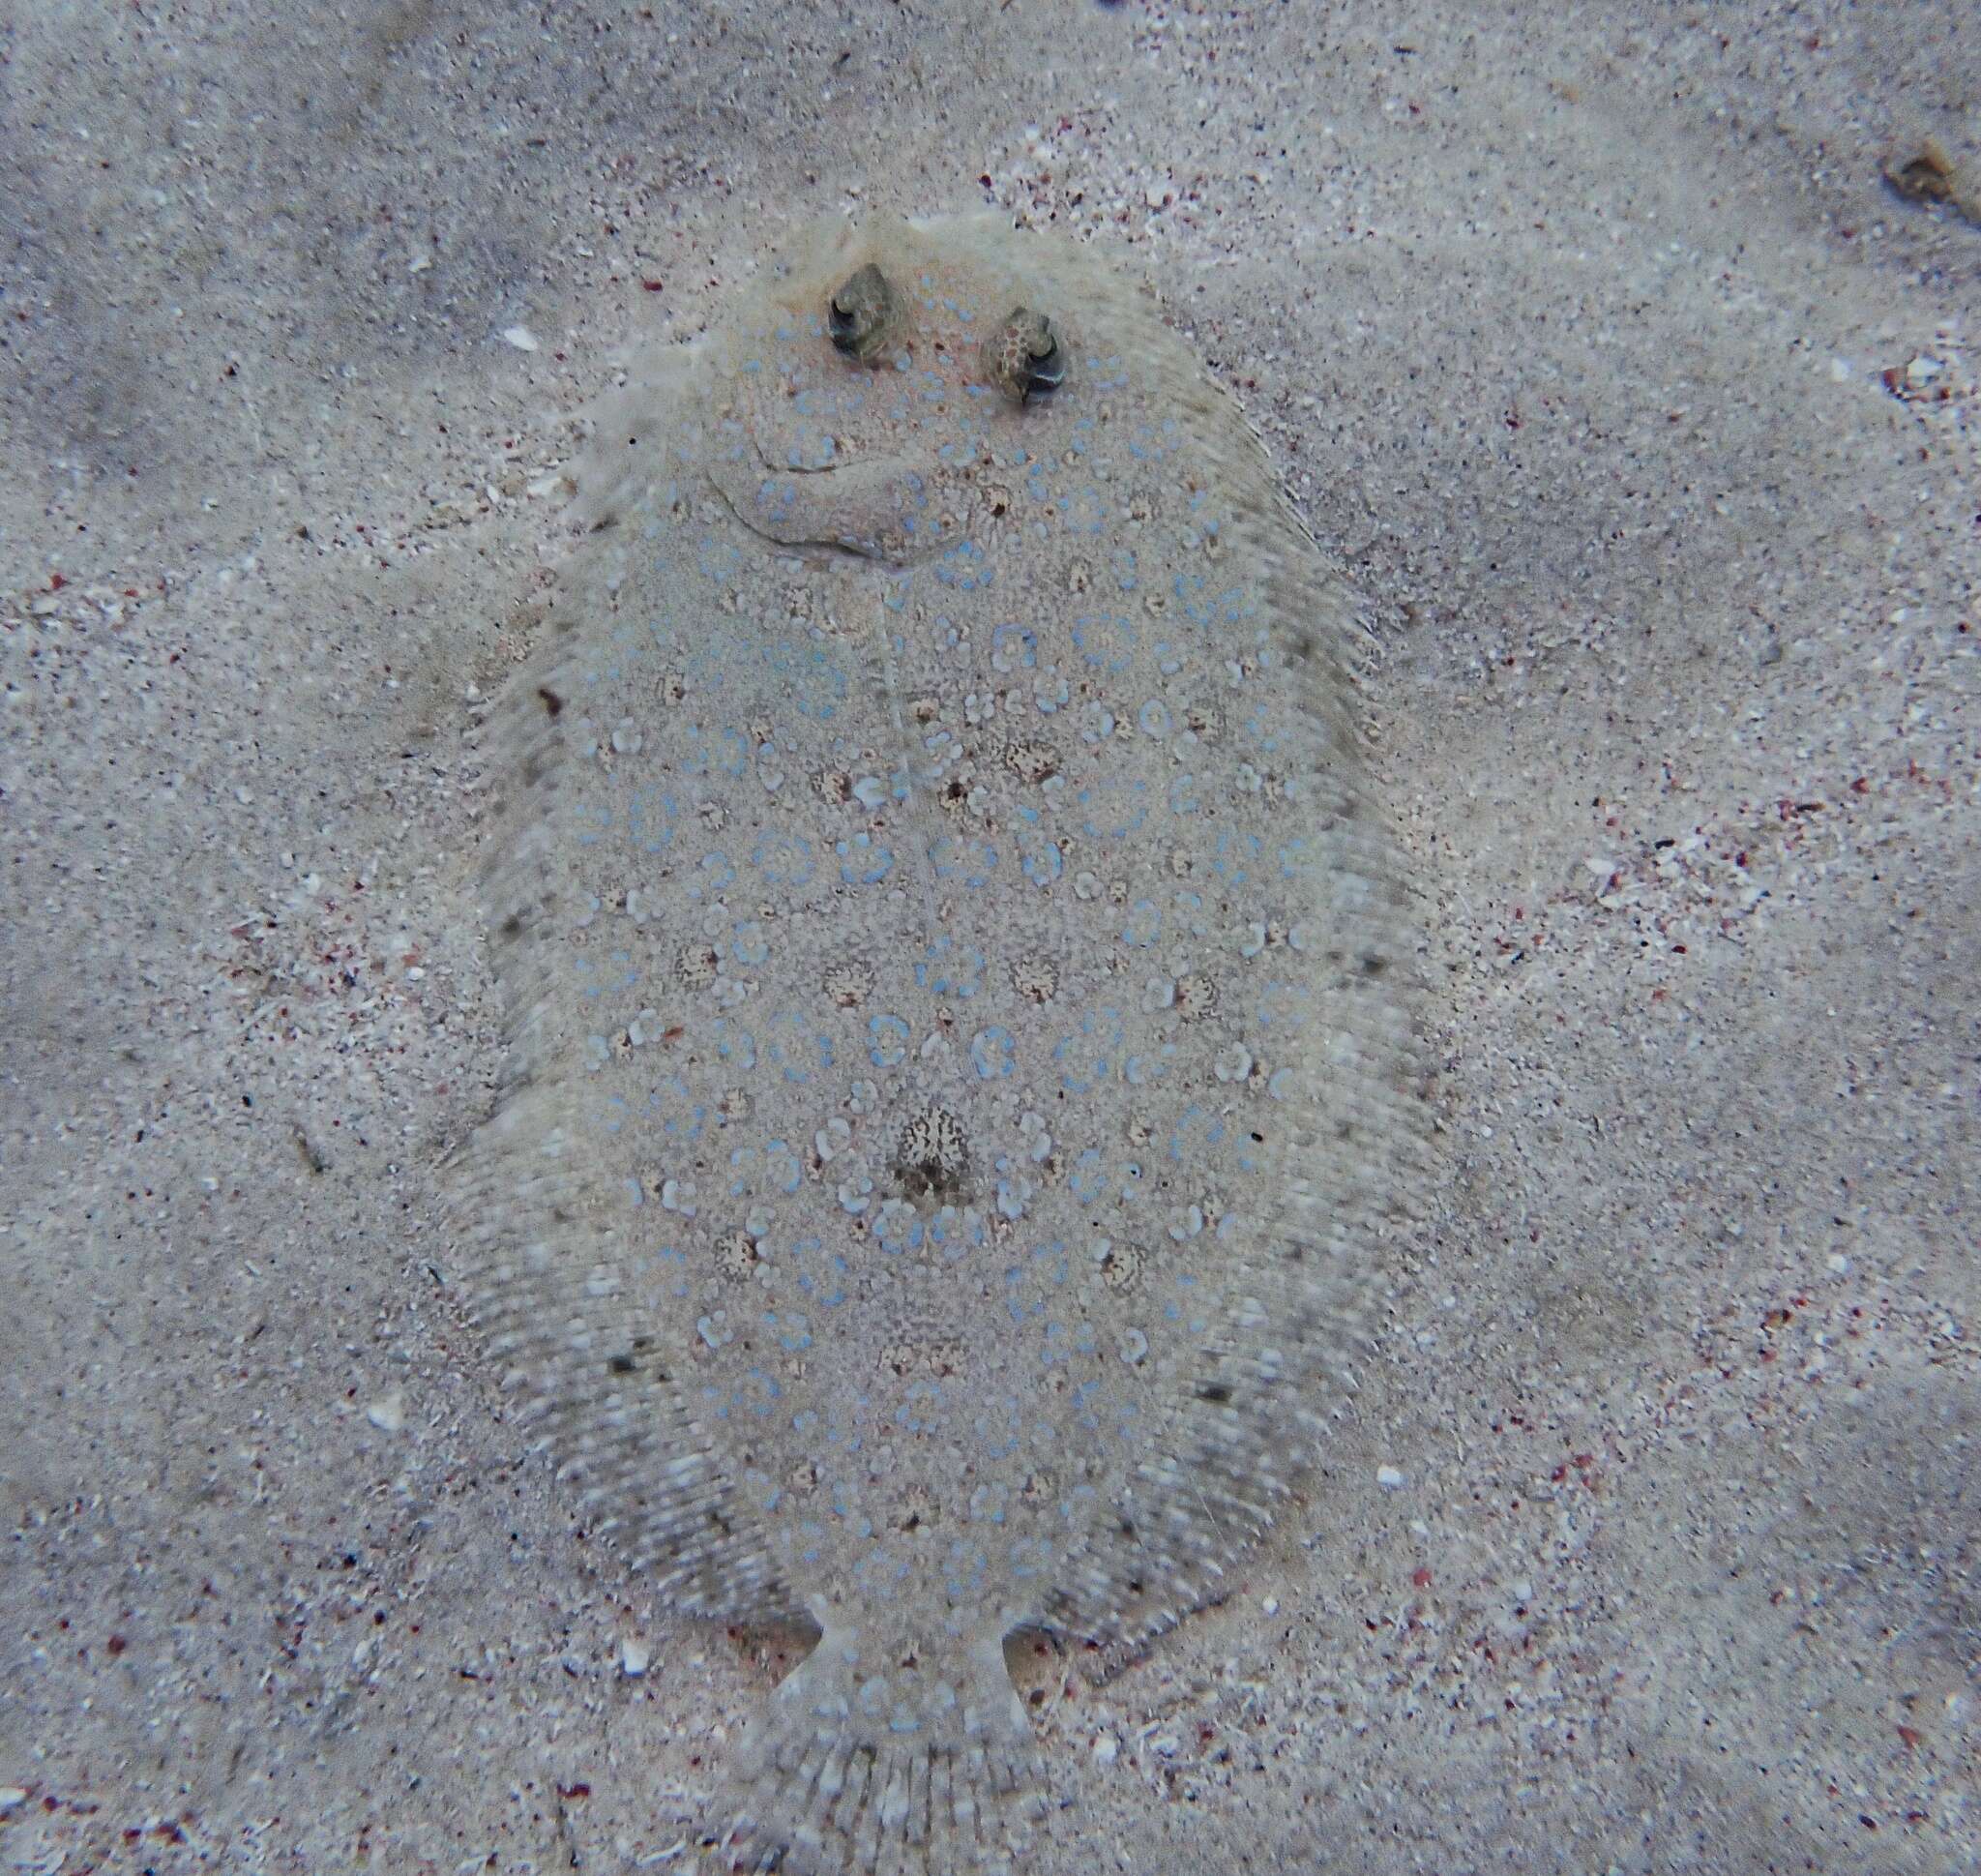 Image of Maculated Flounder